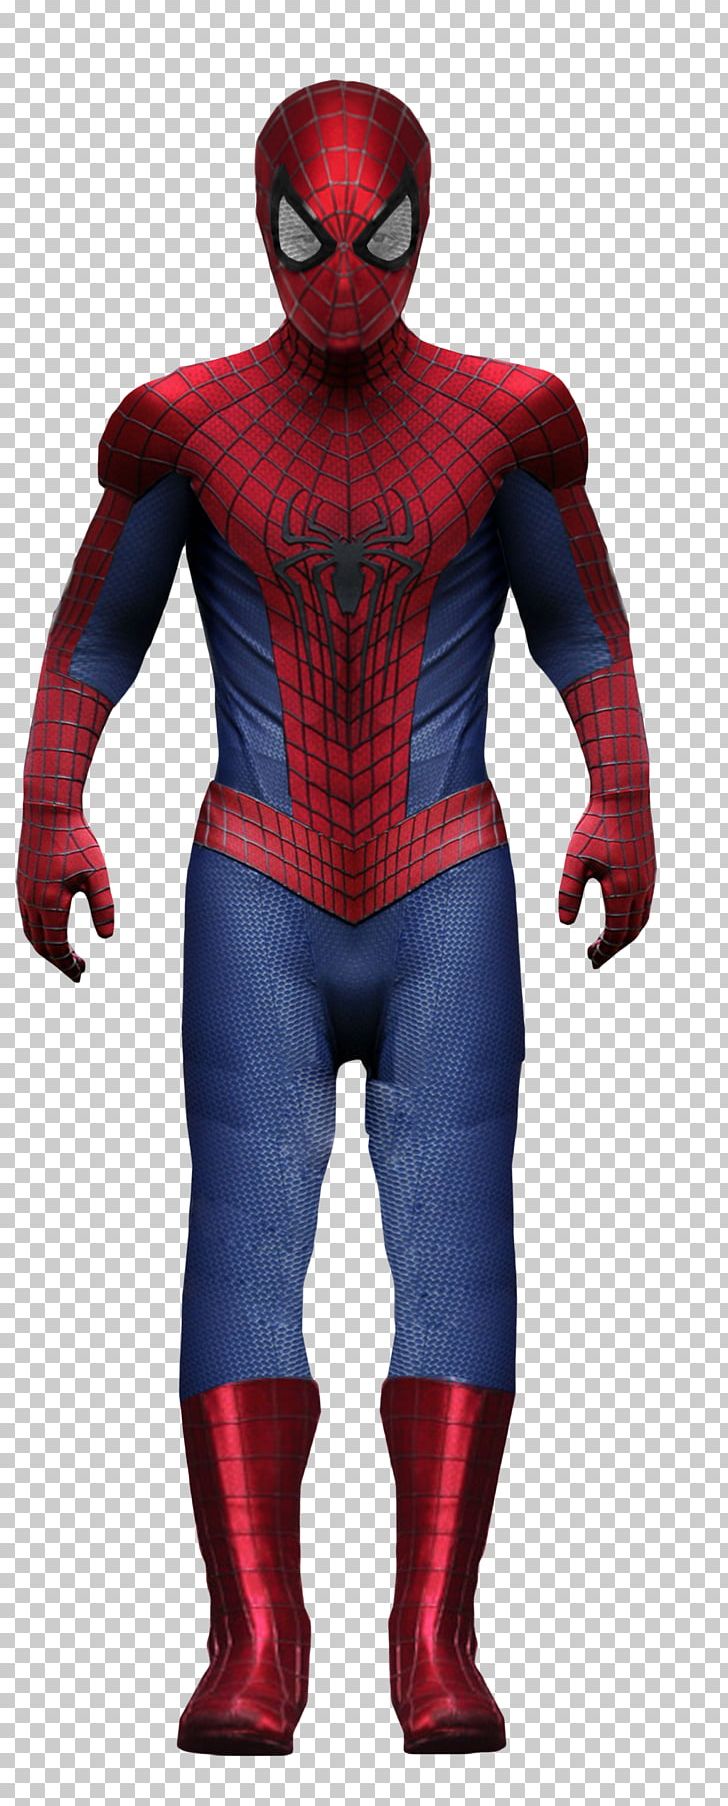 Spider-Man: Homecoming Film Series Suit Symbiote Mask PNG, Clipart, Action Figure, Amazing Spiderman, Andrew Garfield, Costume, Costume Design Free PNG Download